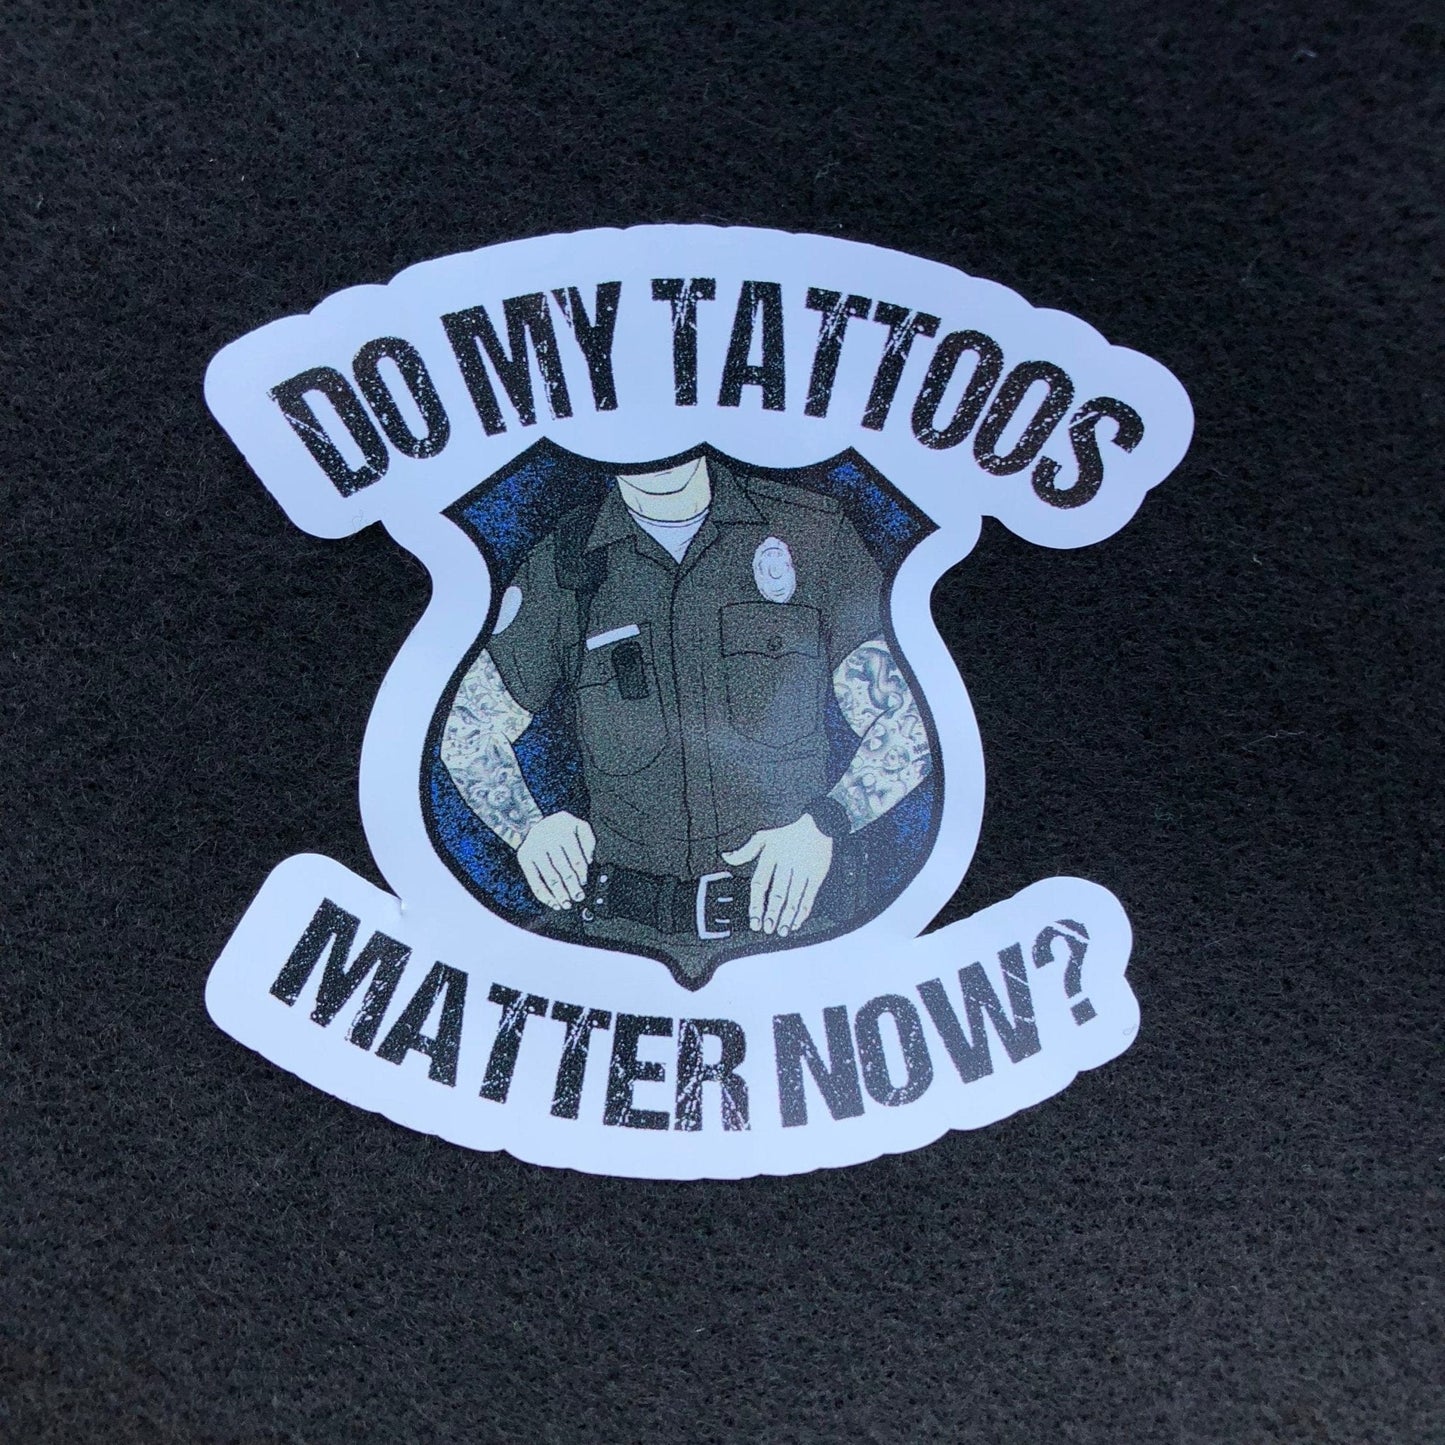 Chief Miller Decal Do My Tattoos Matter Now? Police - Decal Apparel